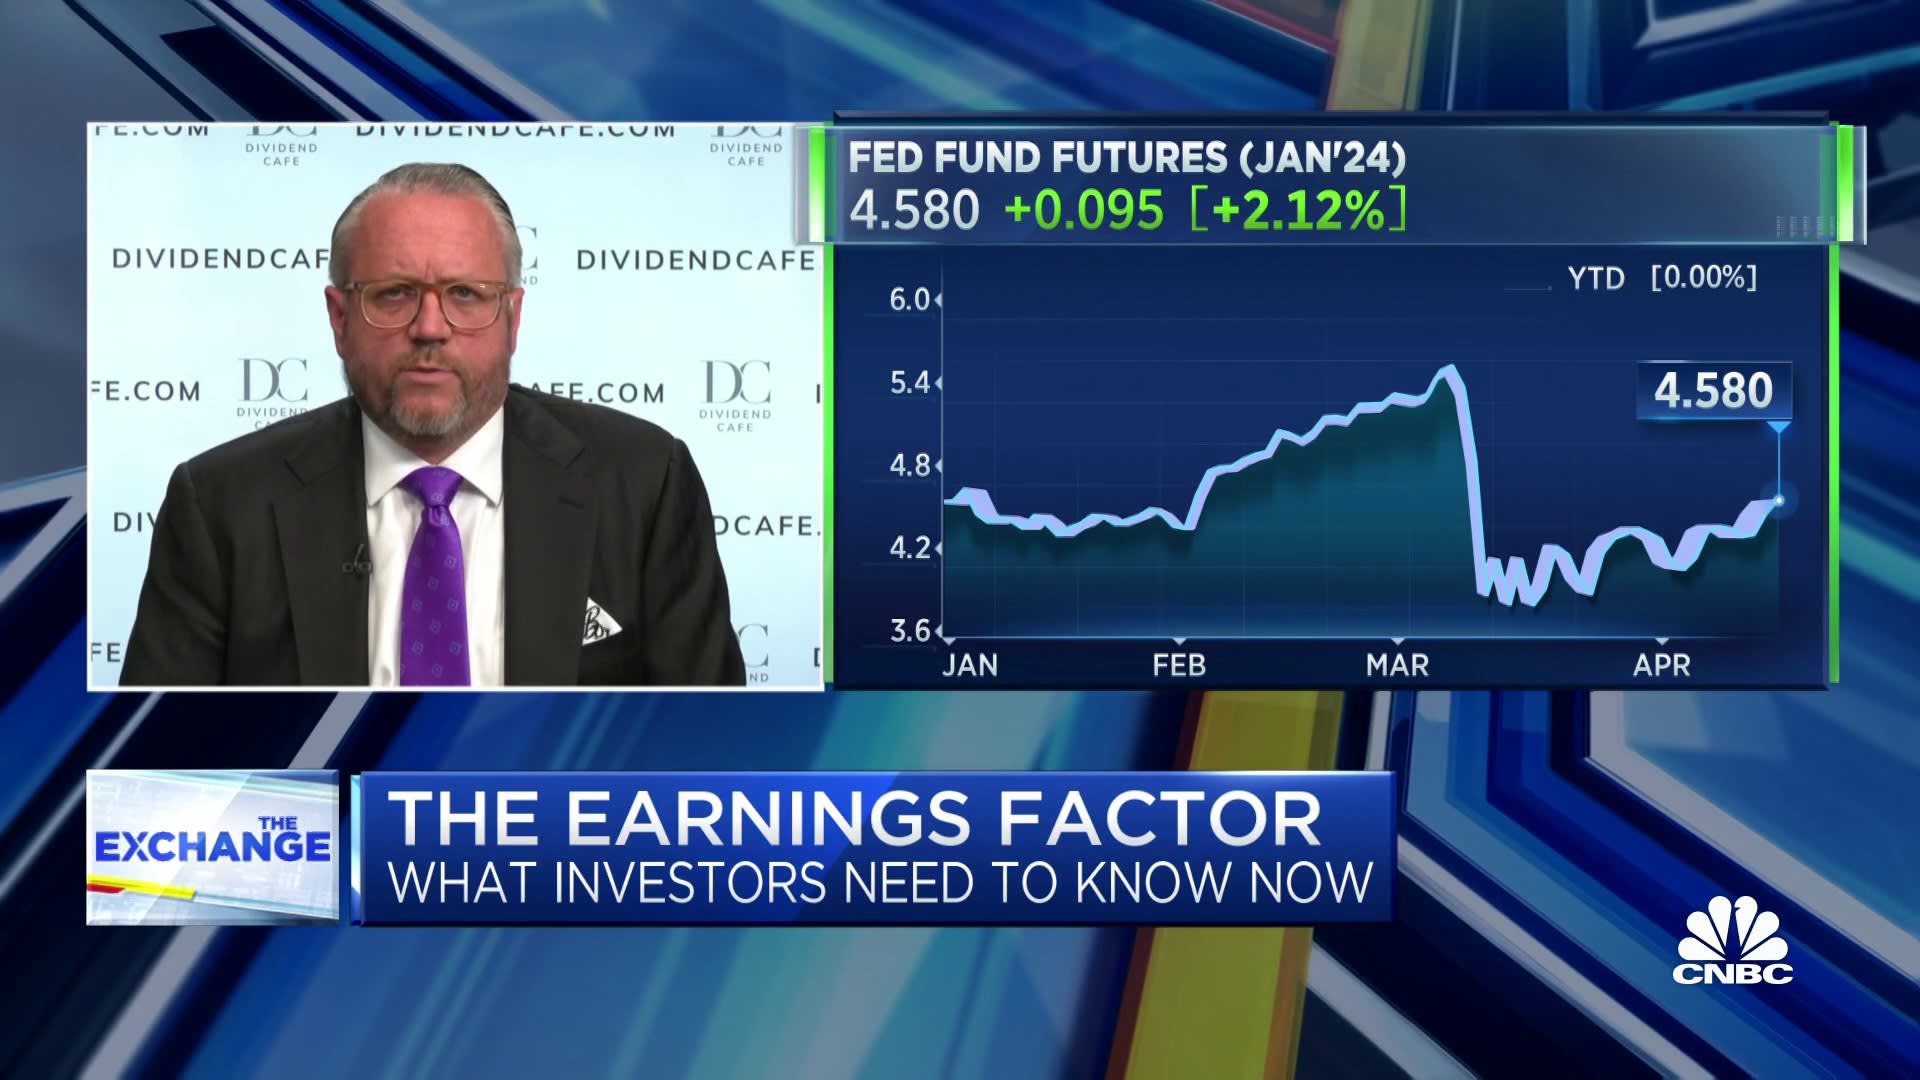 Bahnsen Group's David Bahnsen expects the Fed to over-tighten until it ...